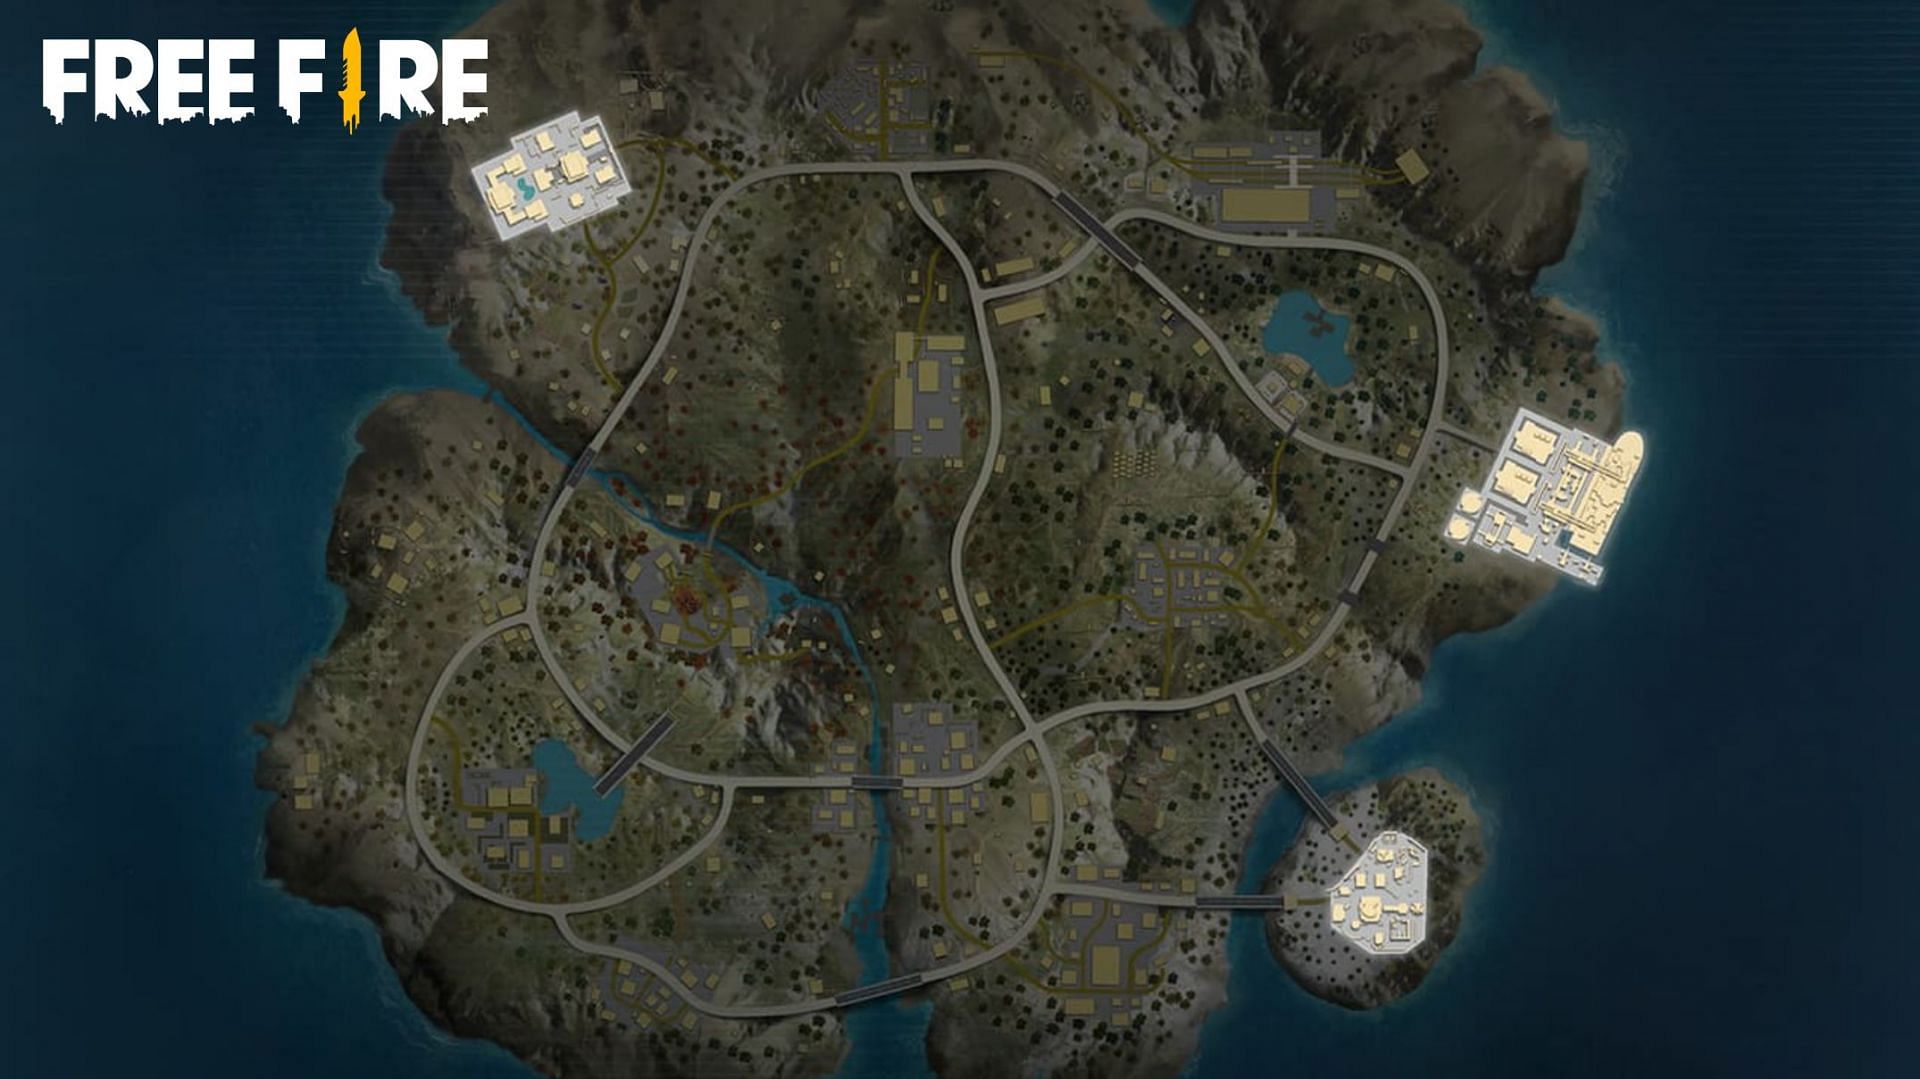 Treasure Hunt event has started in Free Fire (Image via Free Fire)